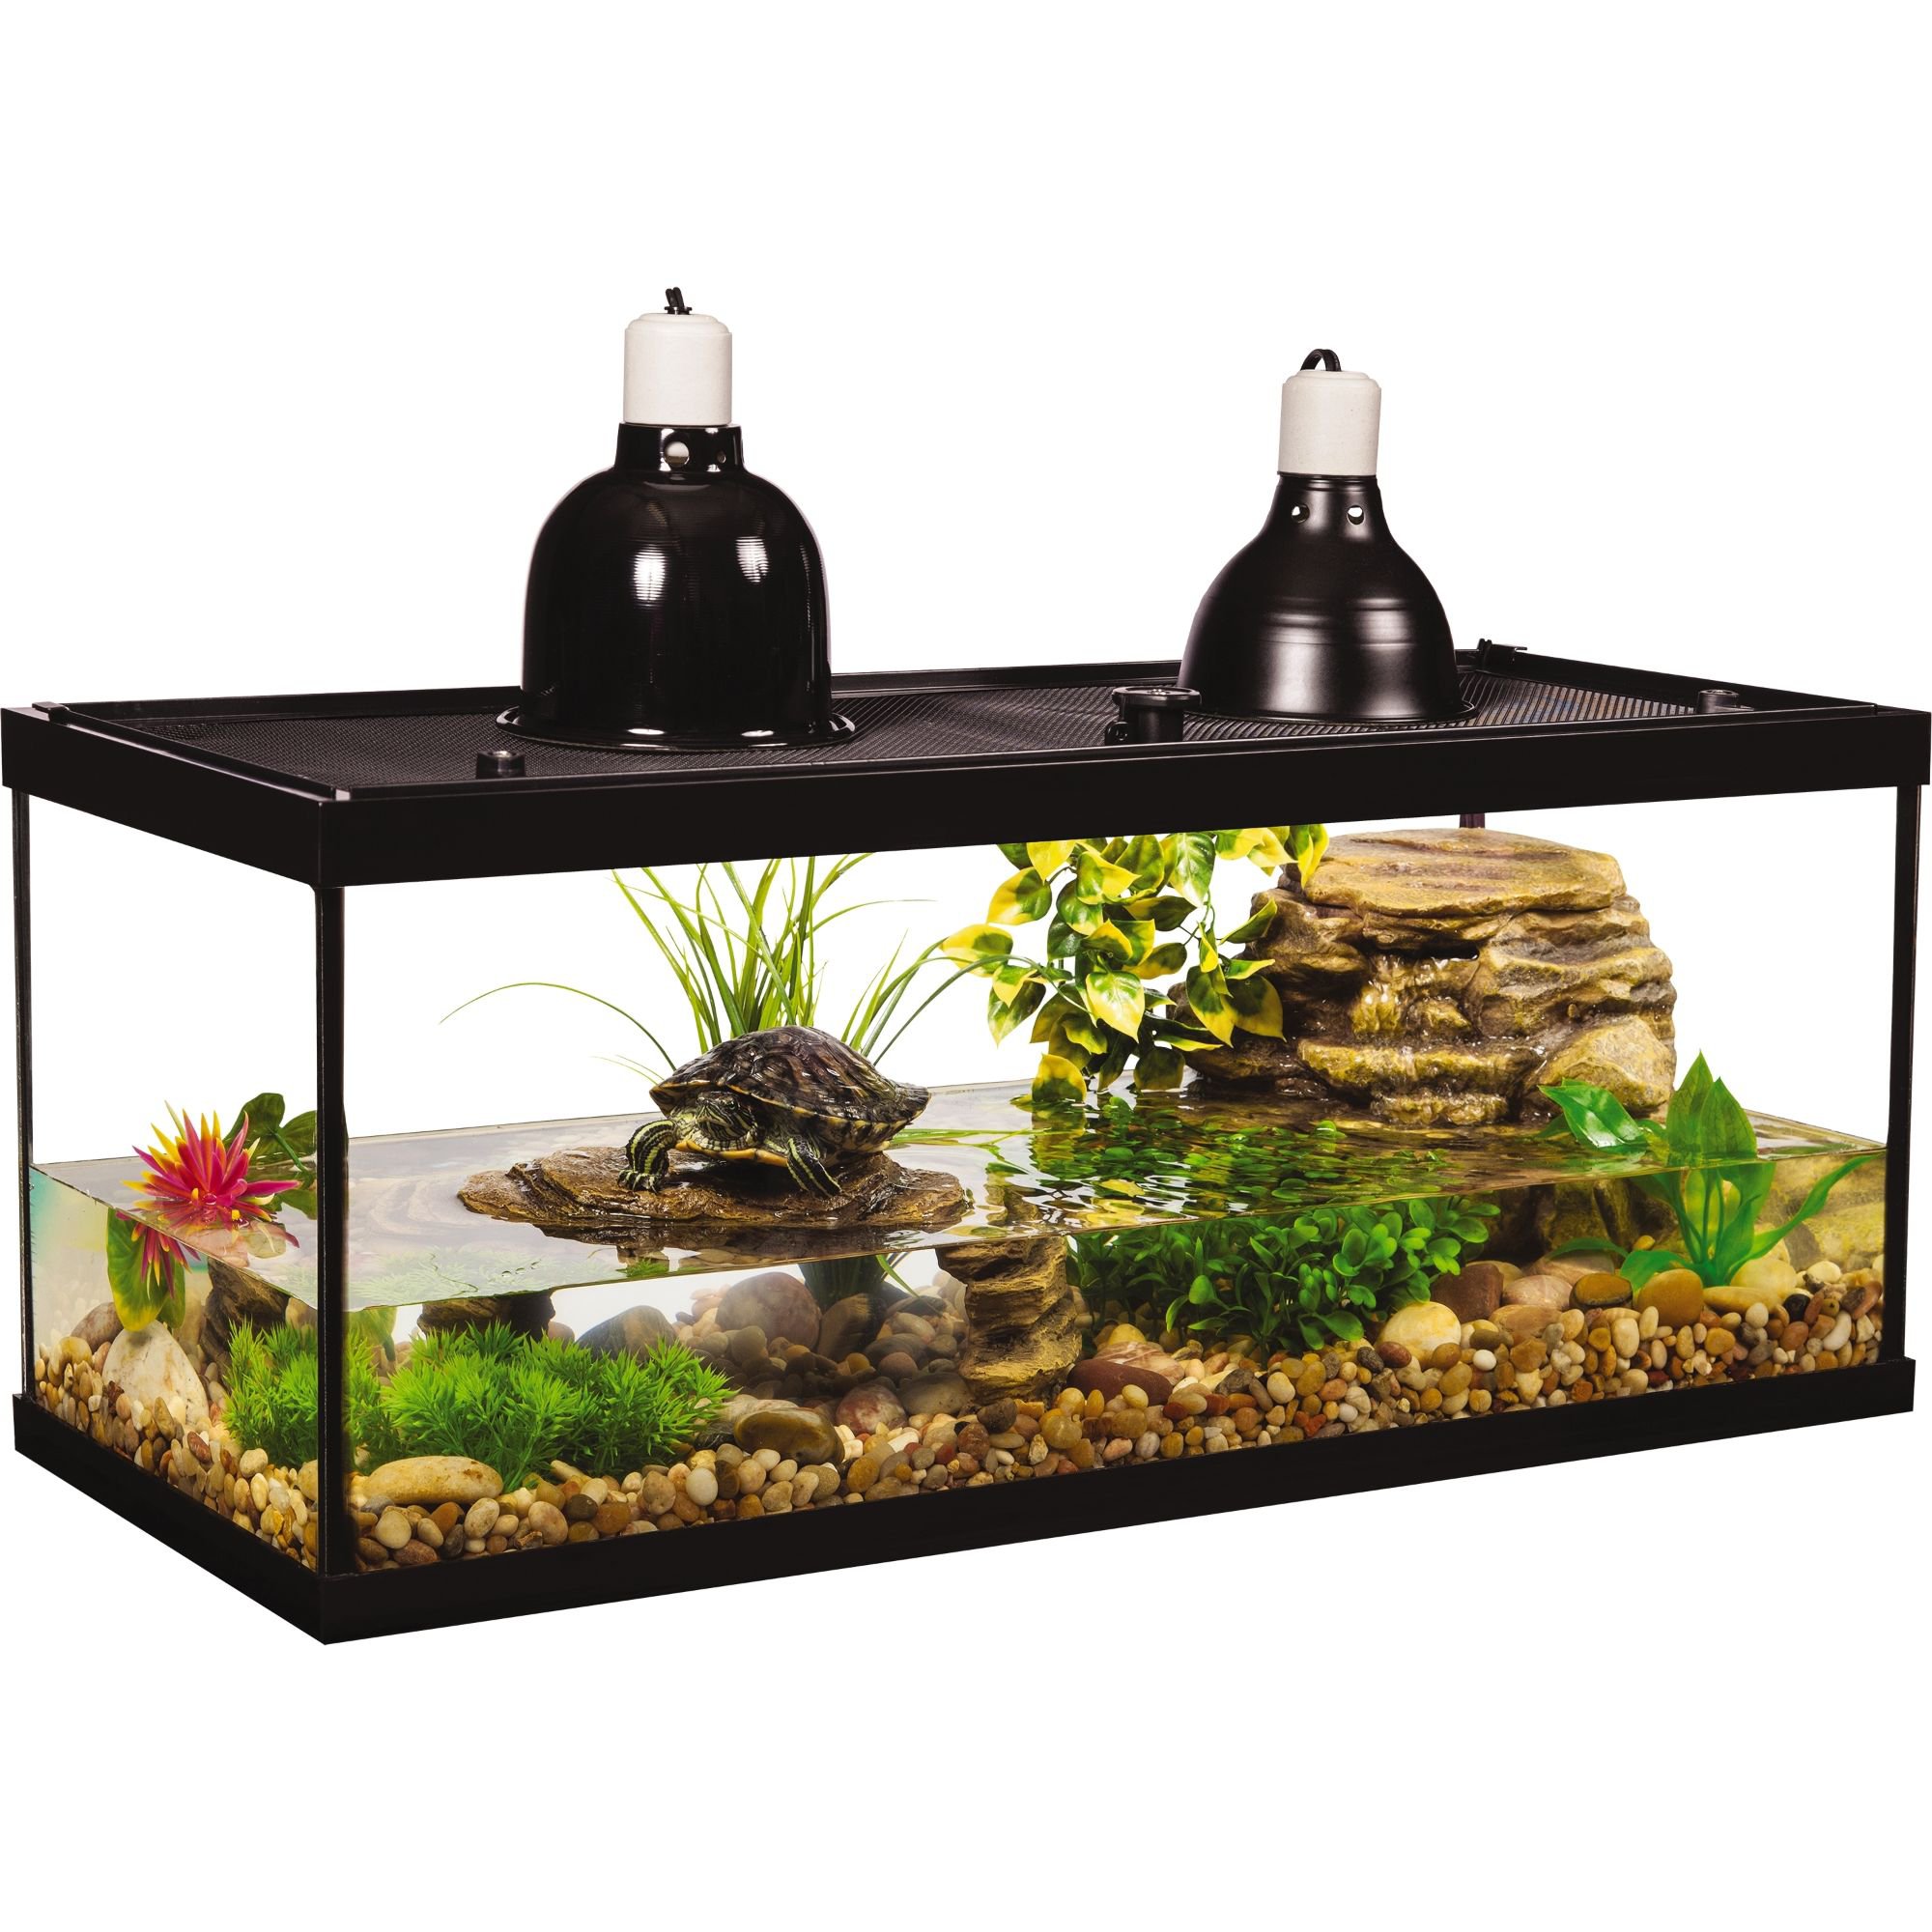 Tetra Aquarium Reptile Glass Kit With Two Dome Lamps 30 L X 12